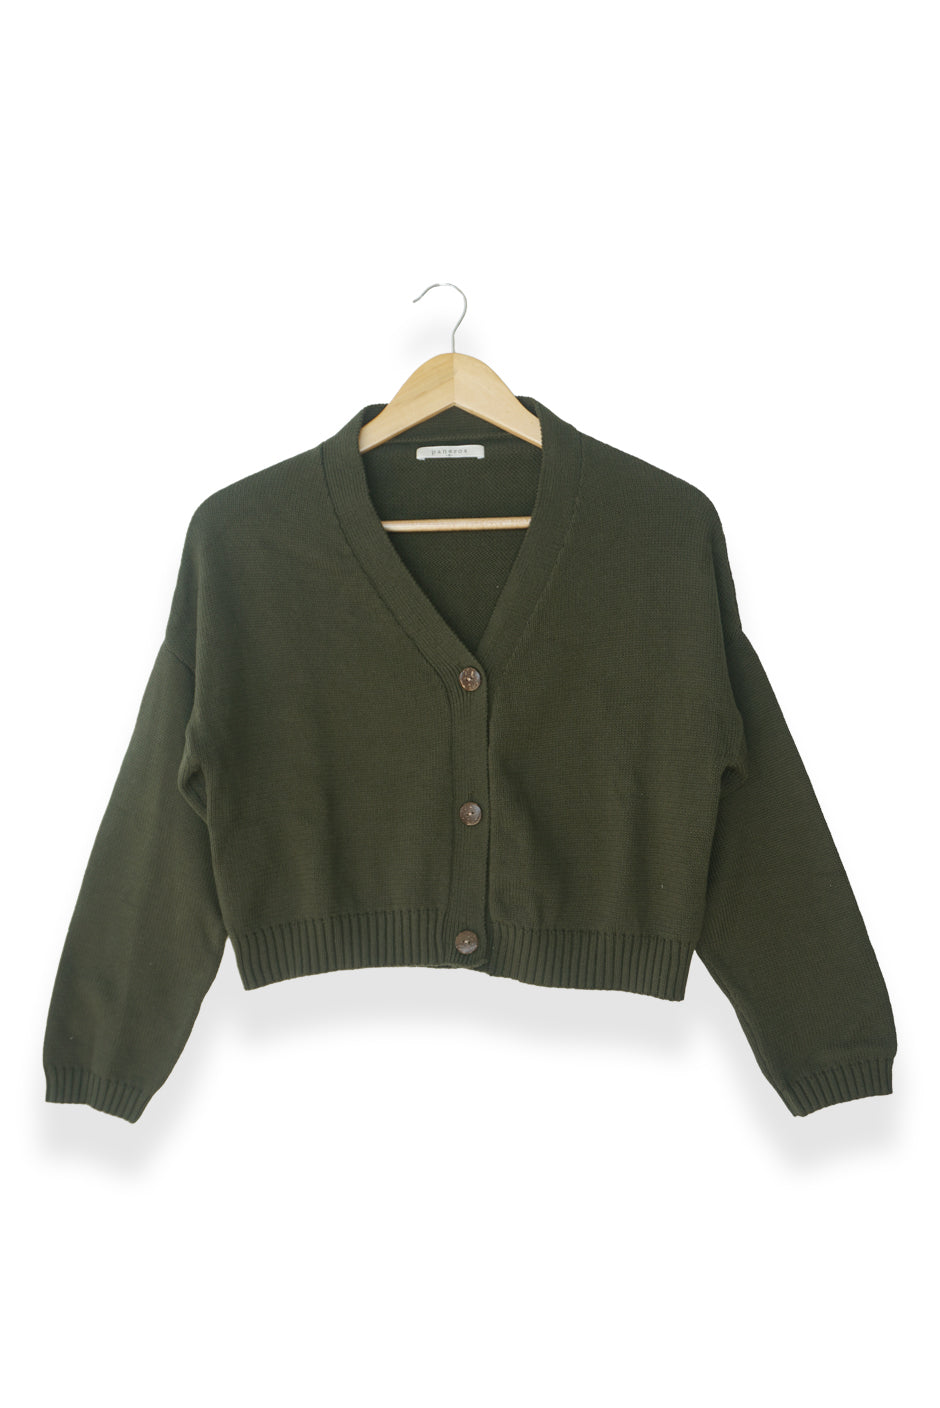 Diana Cardigan in Forest Green